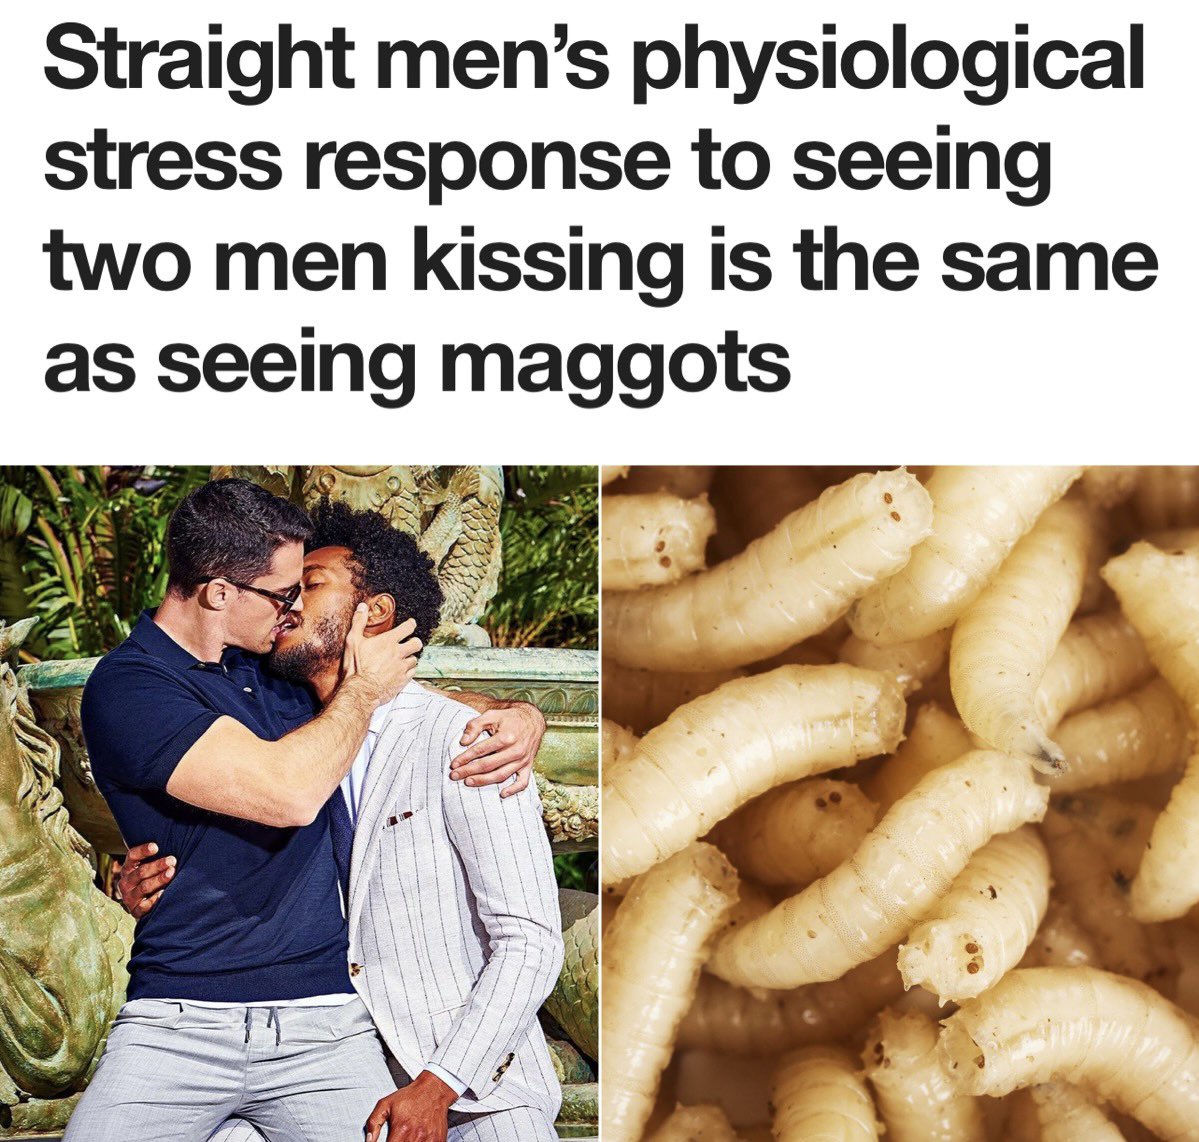 Advertising studies show that progressive and homosexual advertising causes the stress response in the brain to react in the same way that it would if someone were to be looking at maggots. 

However, presently, the push for “inclusive” and tolerant advertising has been more